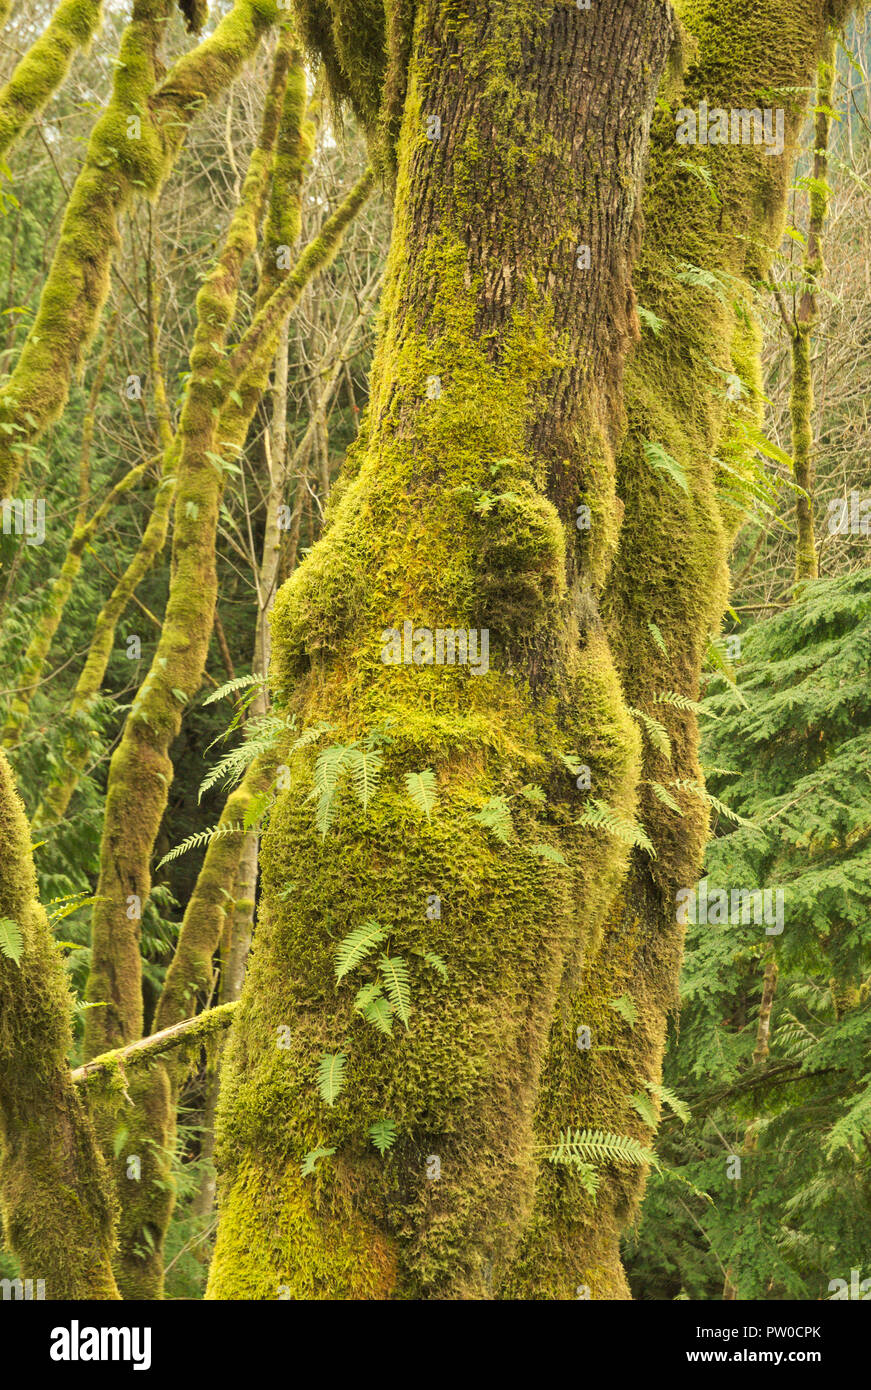 Mossy Trees in a Temperate Rain Forest, Stave Lake, BC, Canada Stock Photo